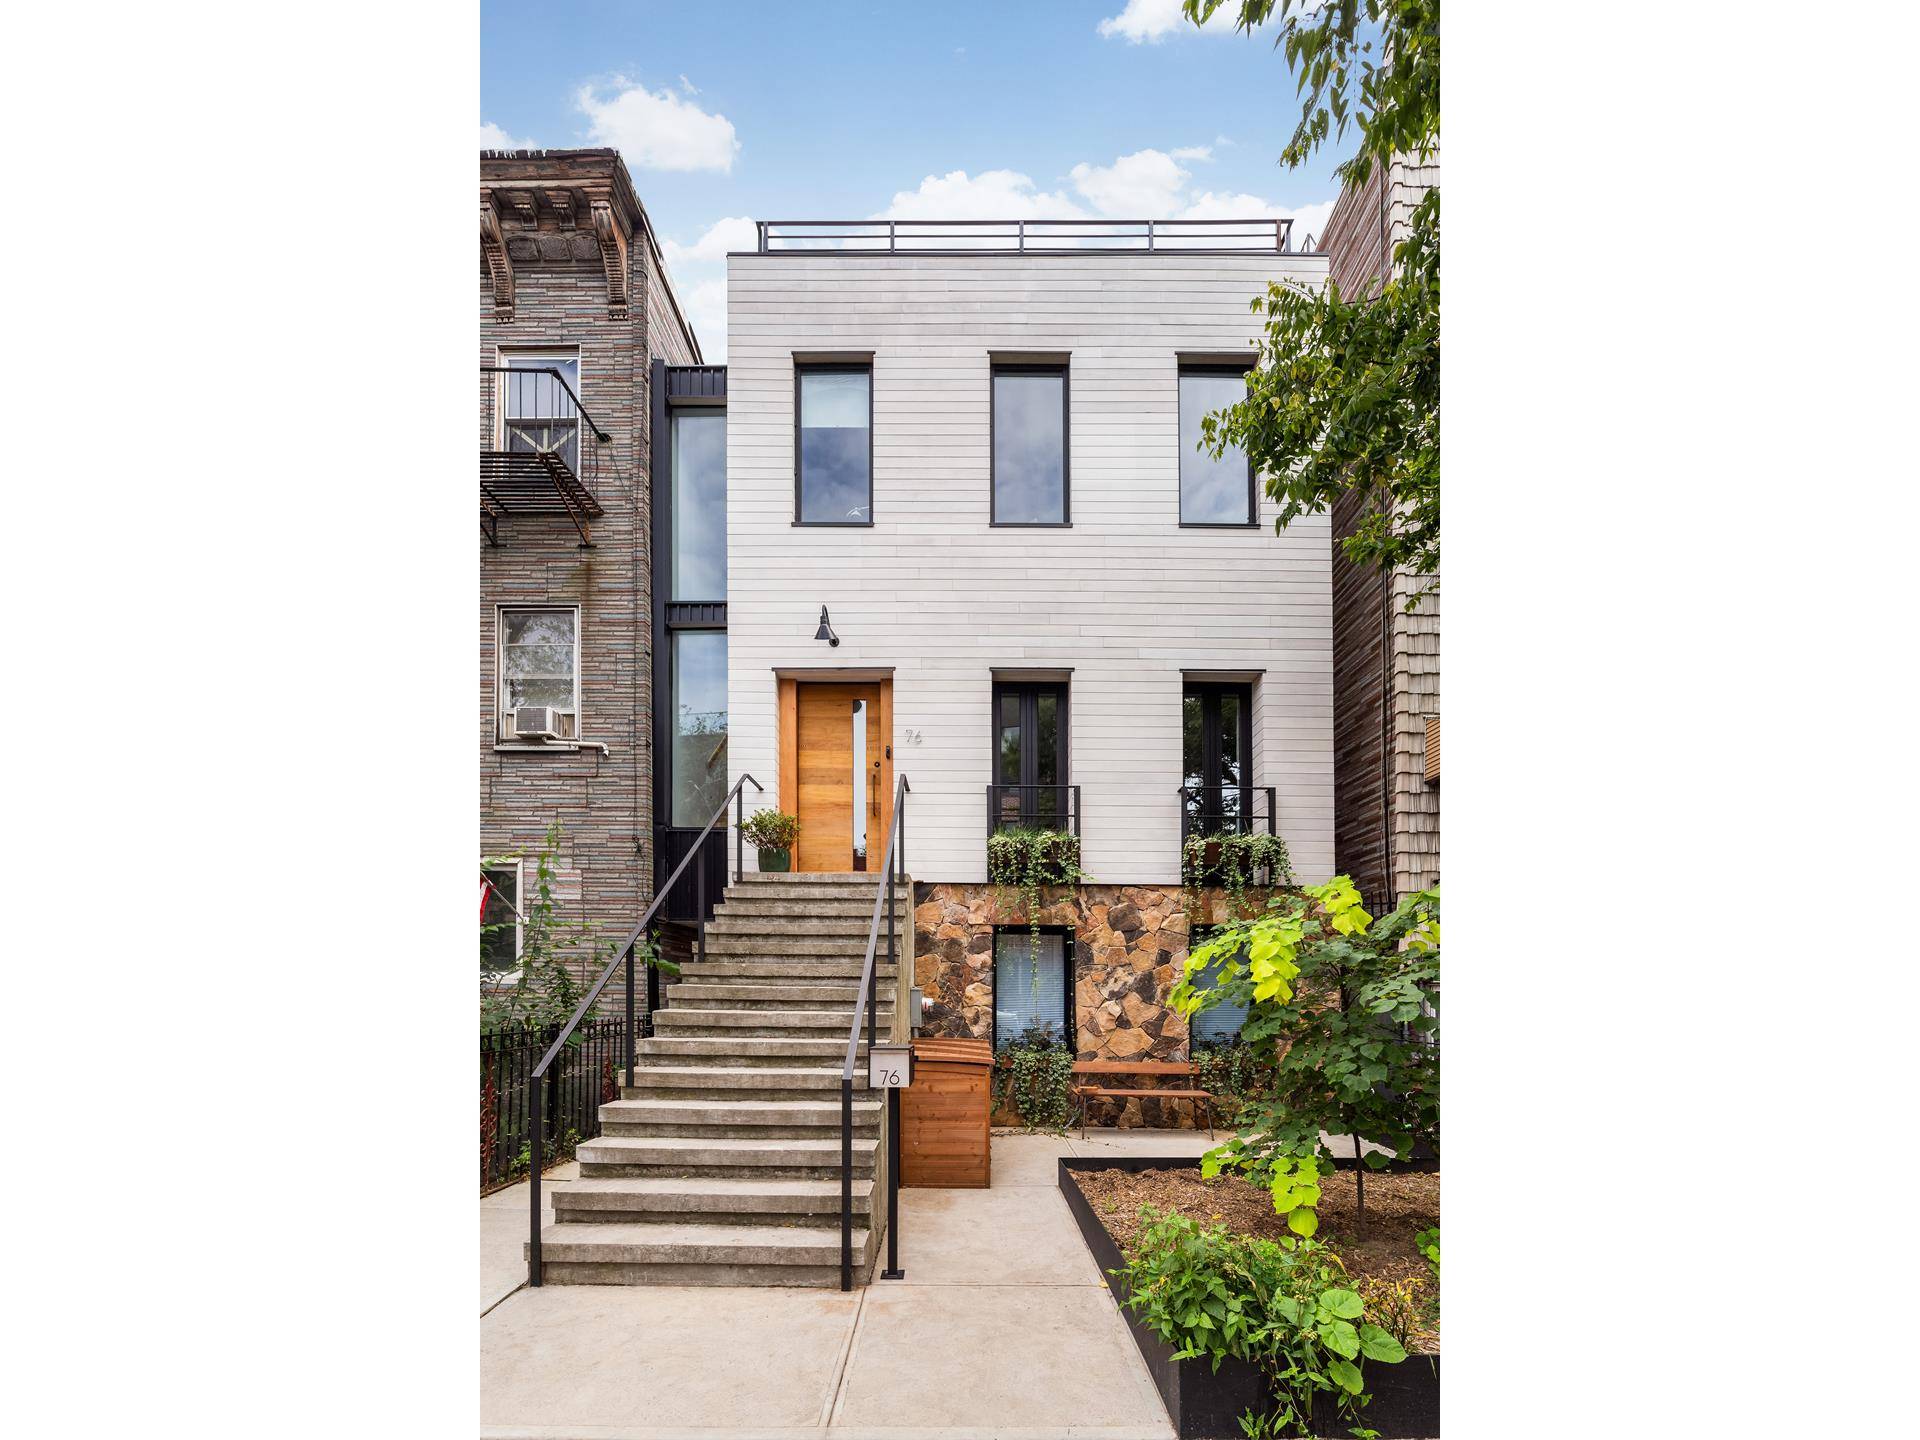 Once an 1850's sea captain's home in Greenpoint, Brooklyn, 76 Green Street is now a spectacular renovated, 2 family mid century townhouse that is breathtaking in every detail.